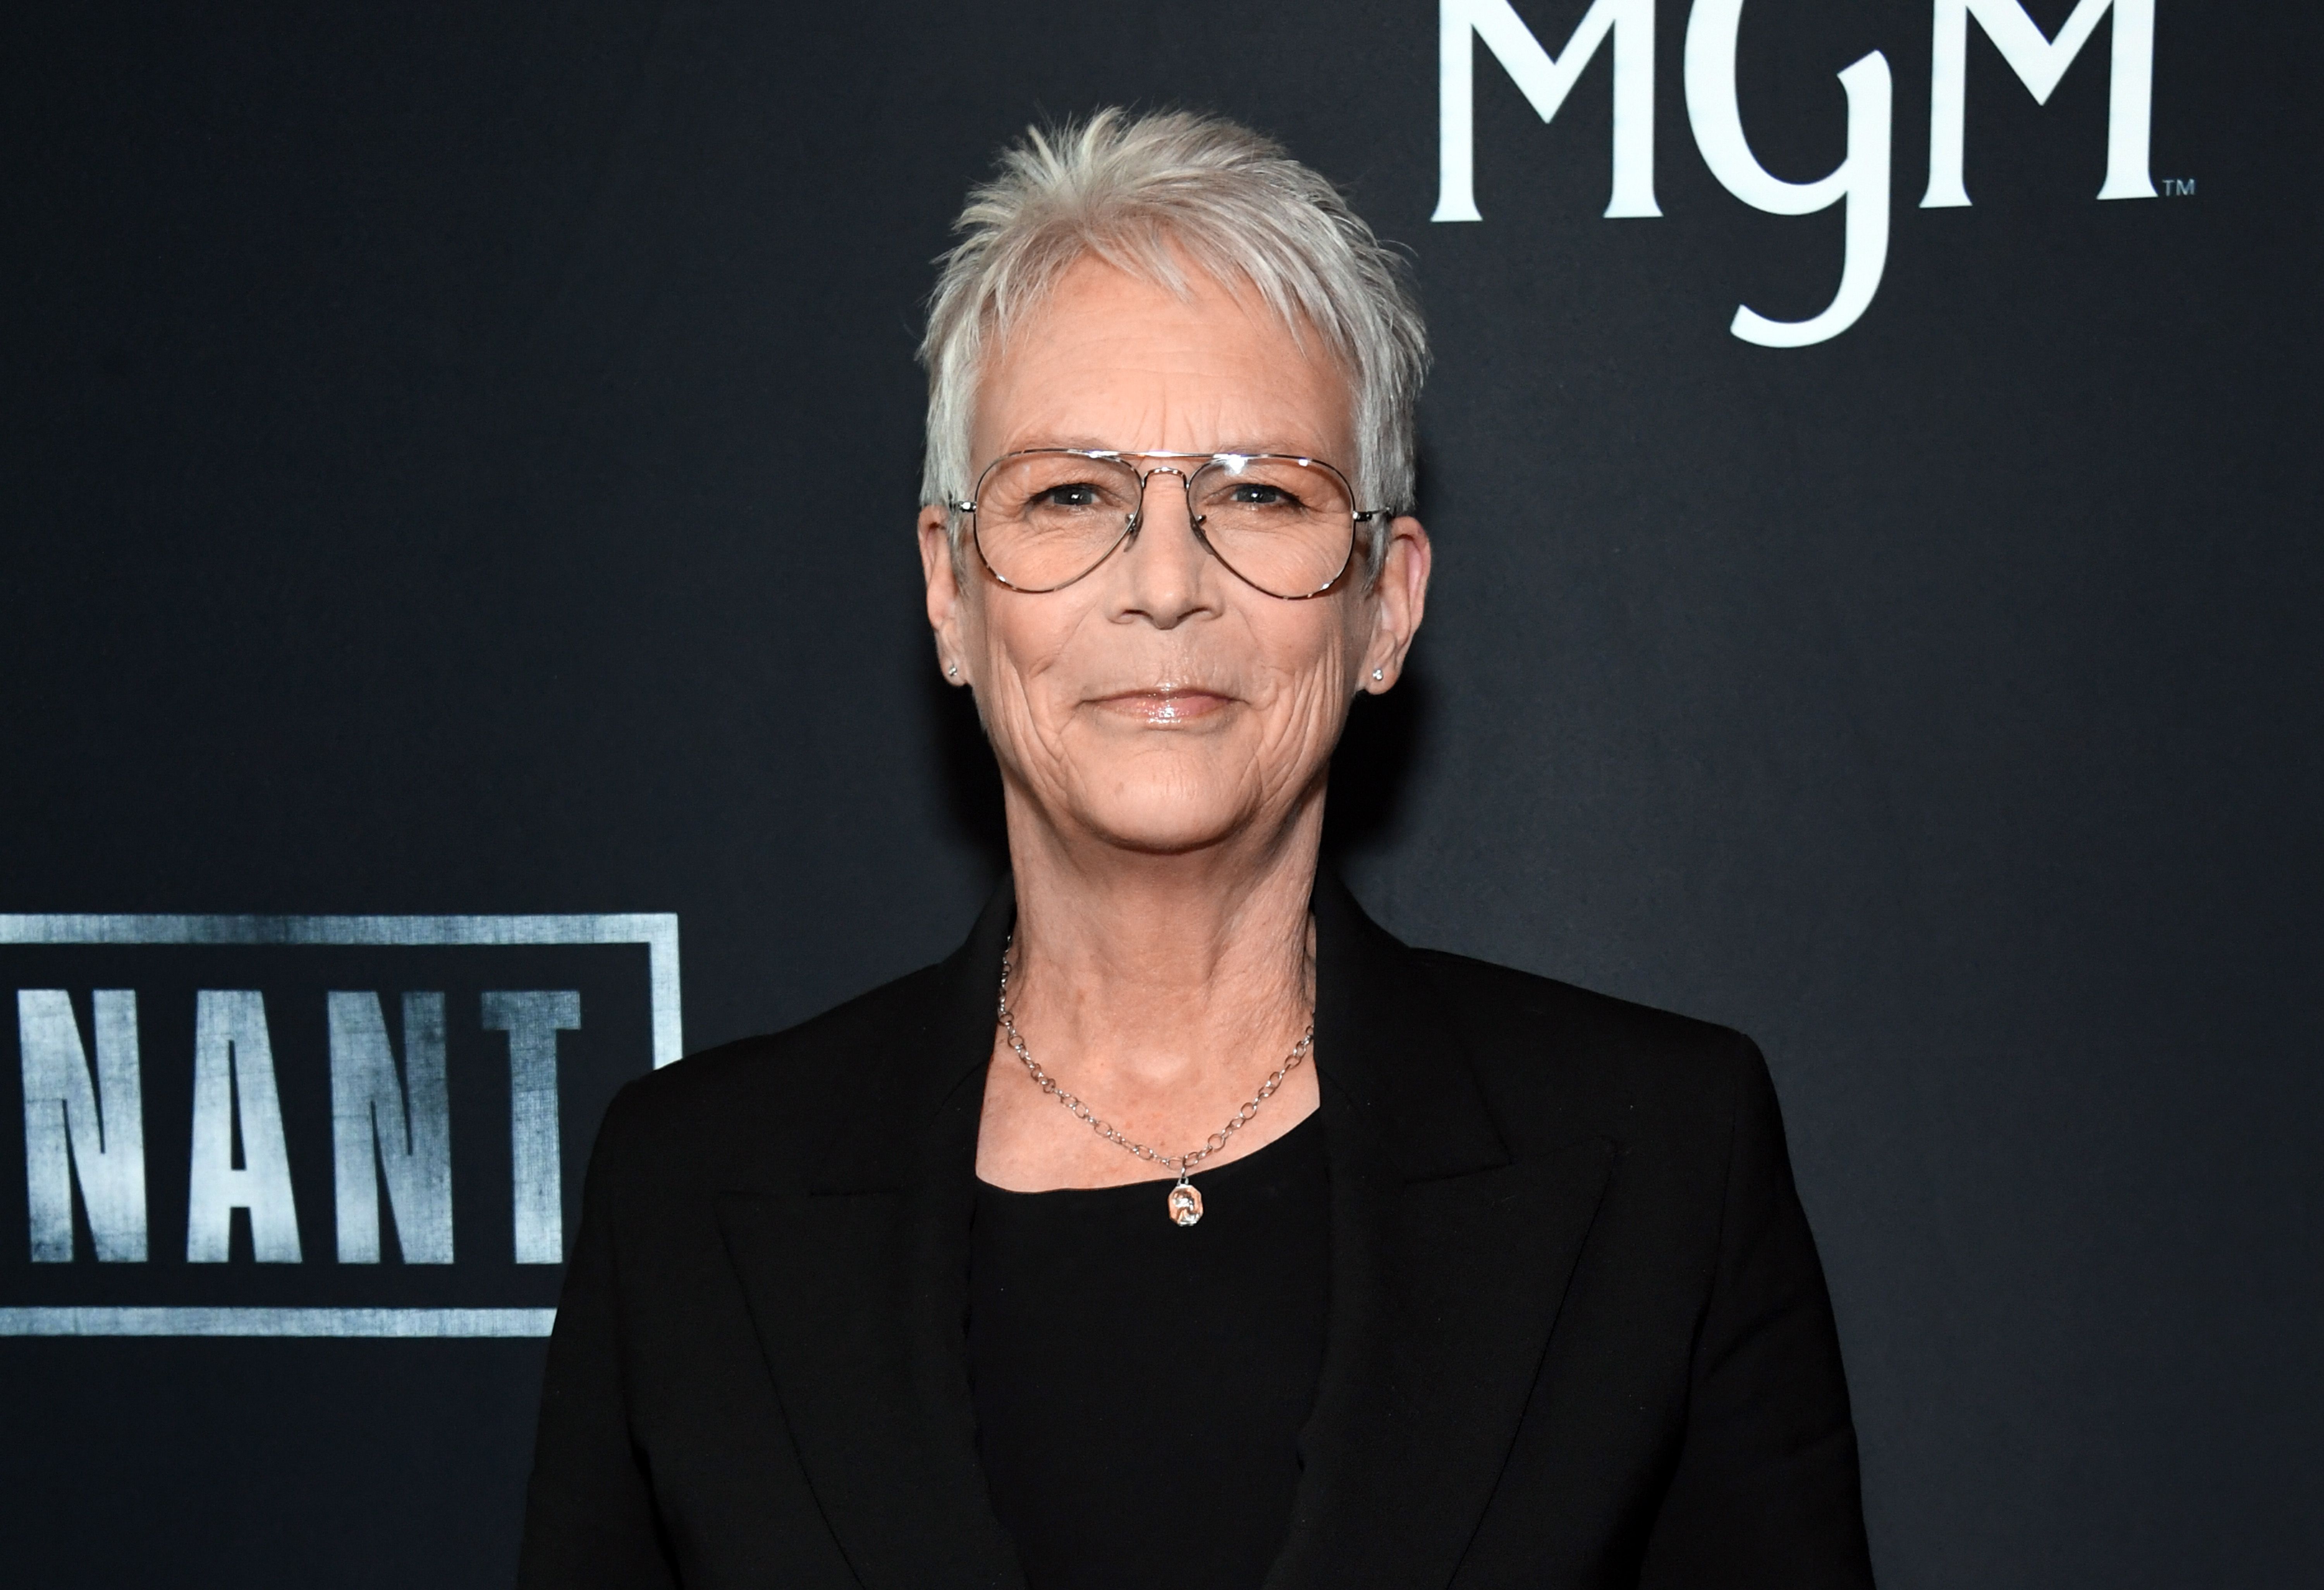 Colouring The Past - WHEN JAMIE LEE CURTIS REVEALED ALL IN